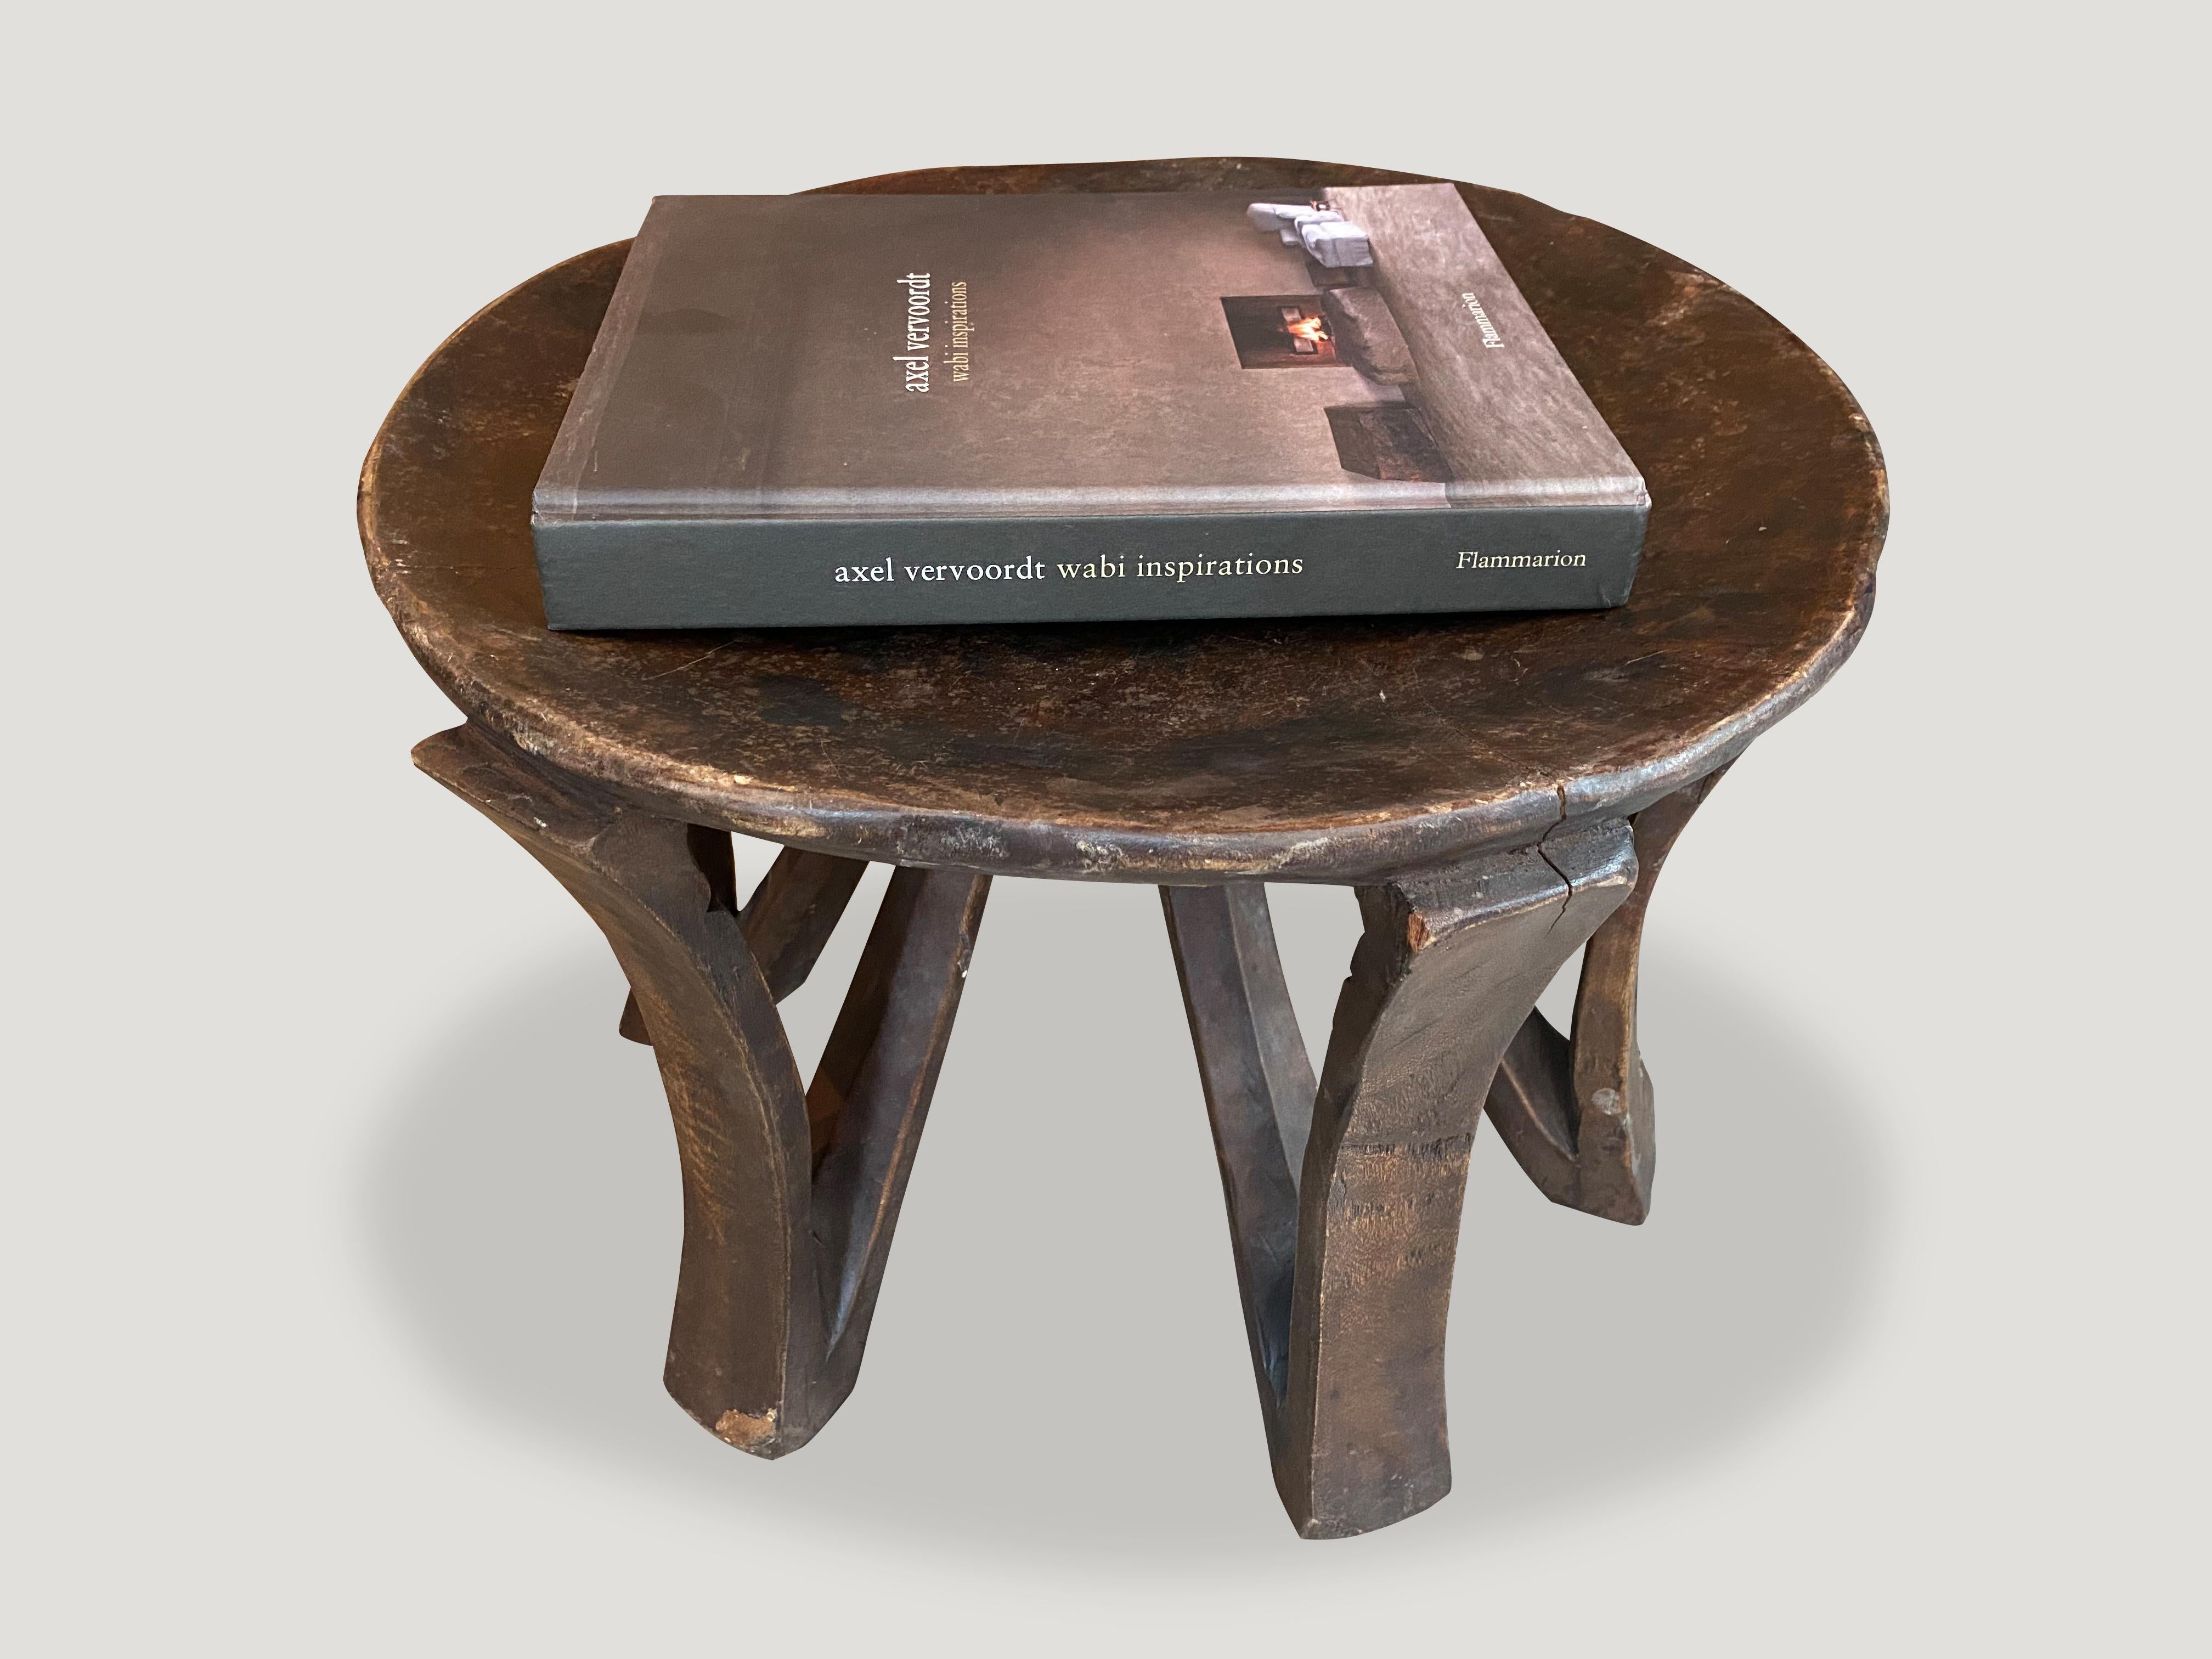 Hand carved from a single block of mahogany wood, an African mahogany side table or stool. Great for placing a book or perhaps towels in a bathroom, magazines etc. A beautiful, versatile item that is both sculptural and usable.

This side table or